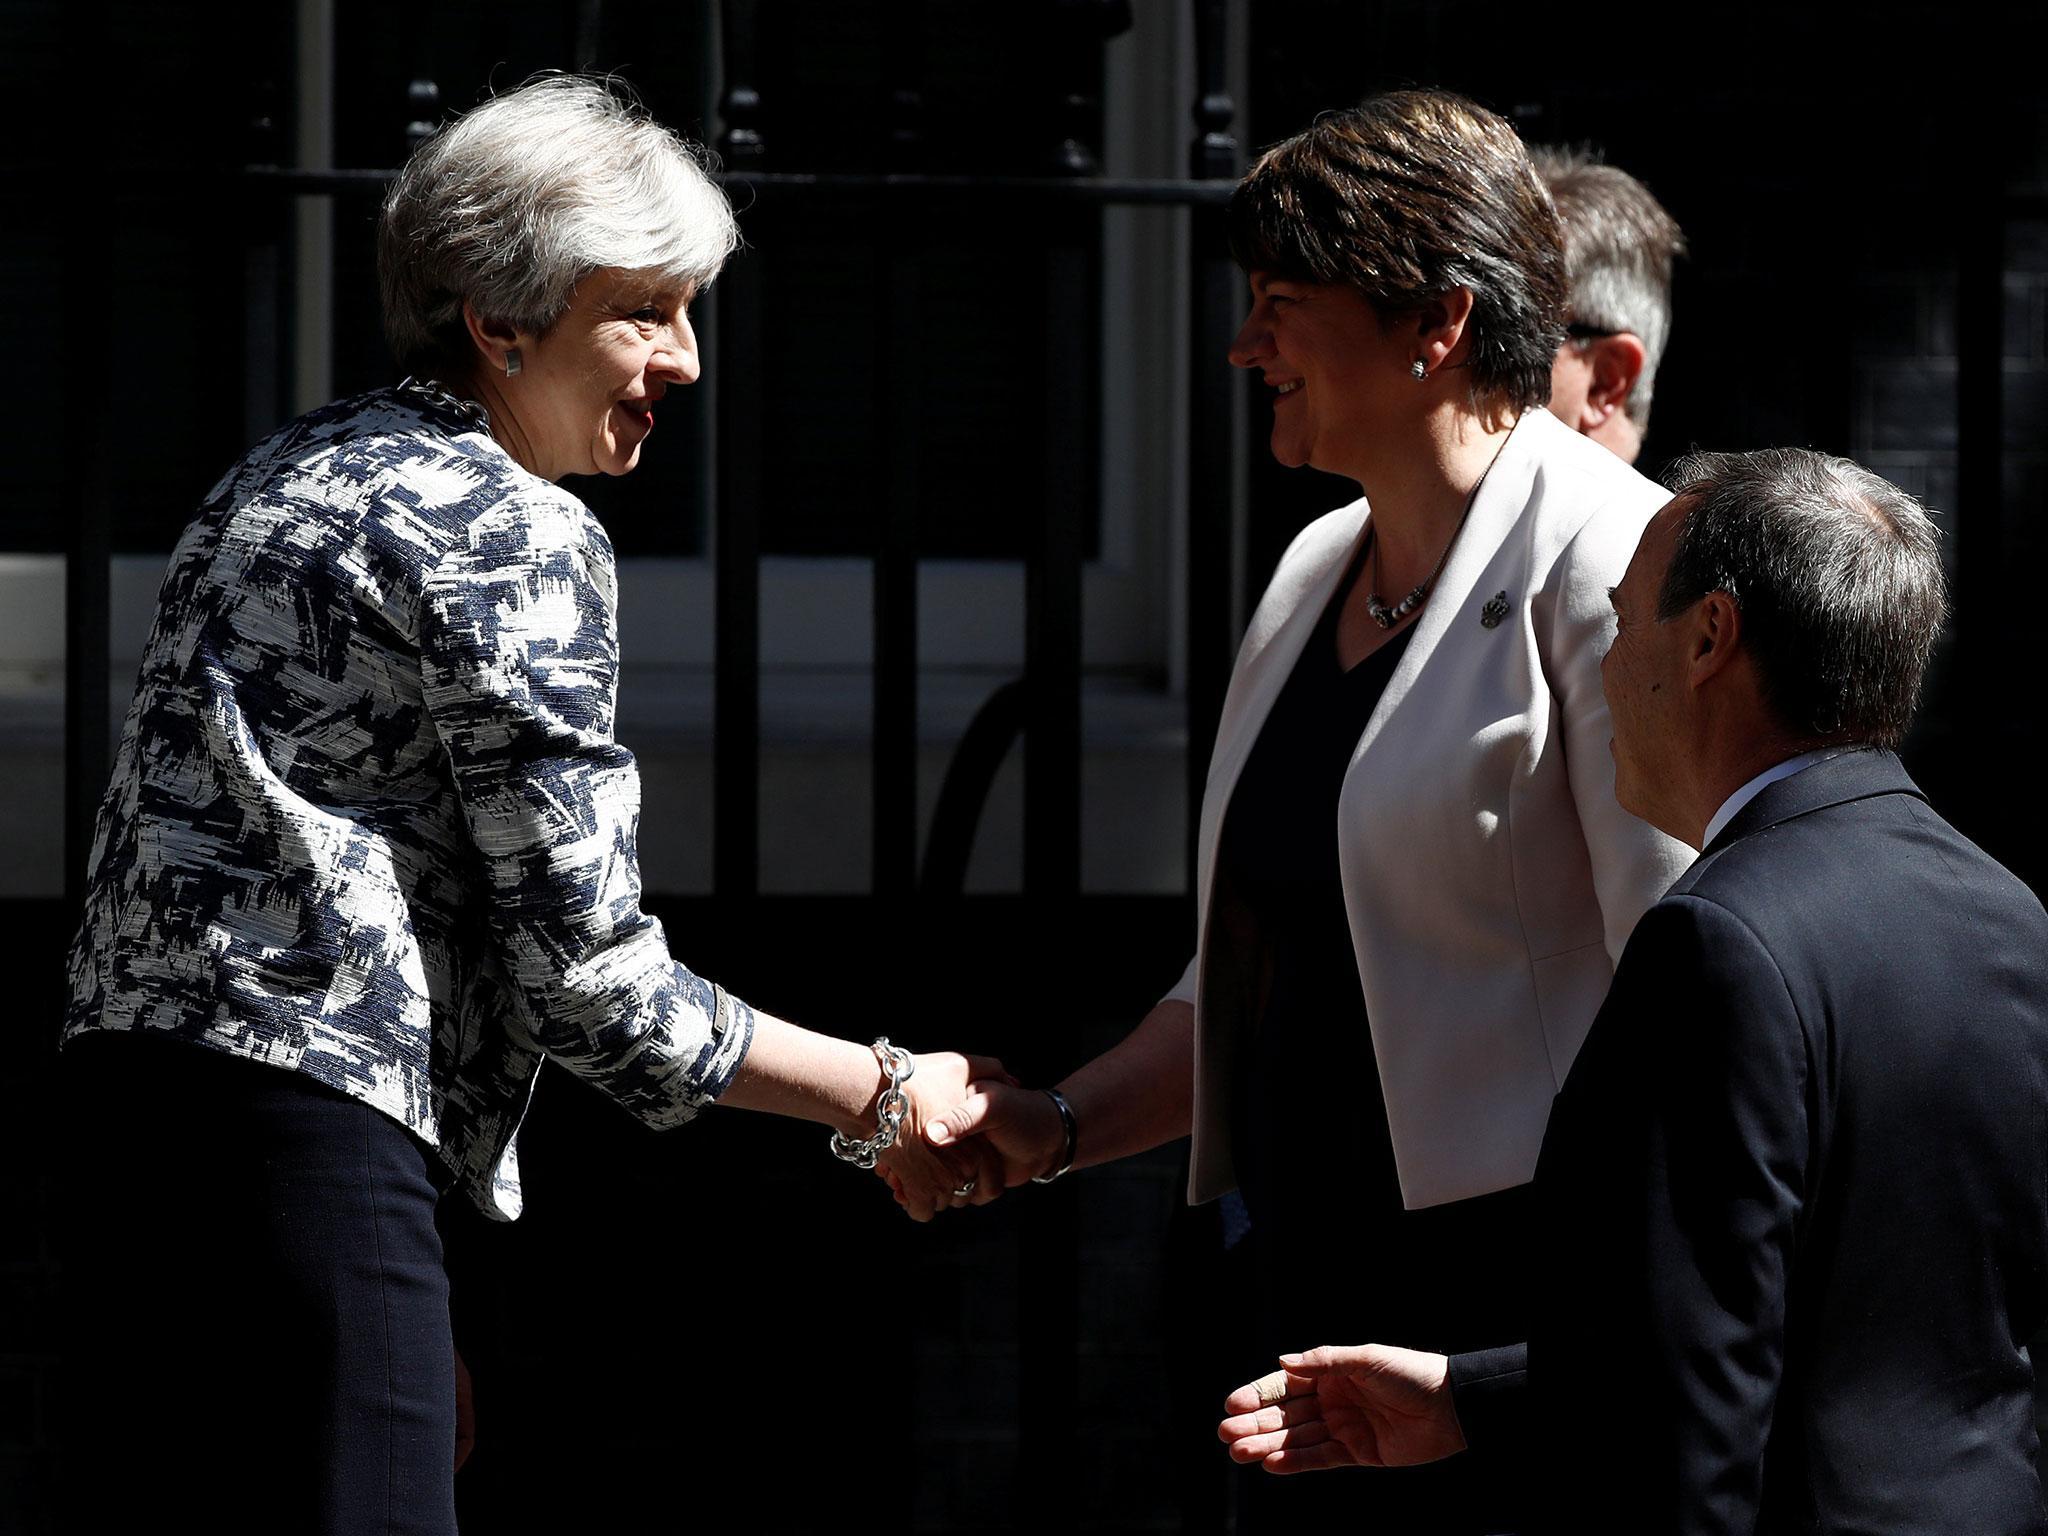 Theresa May and Arlene Foster, the DUP leader, shake hands after their deal was signed in June